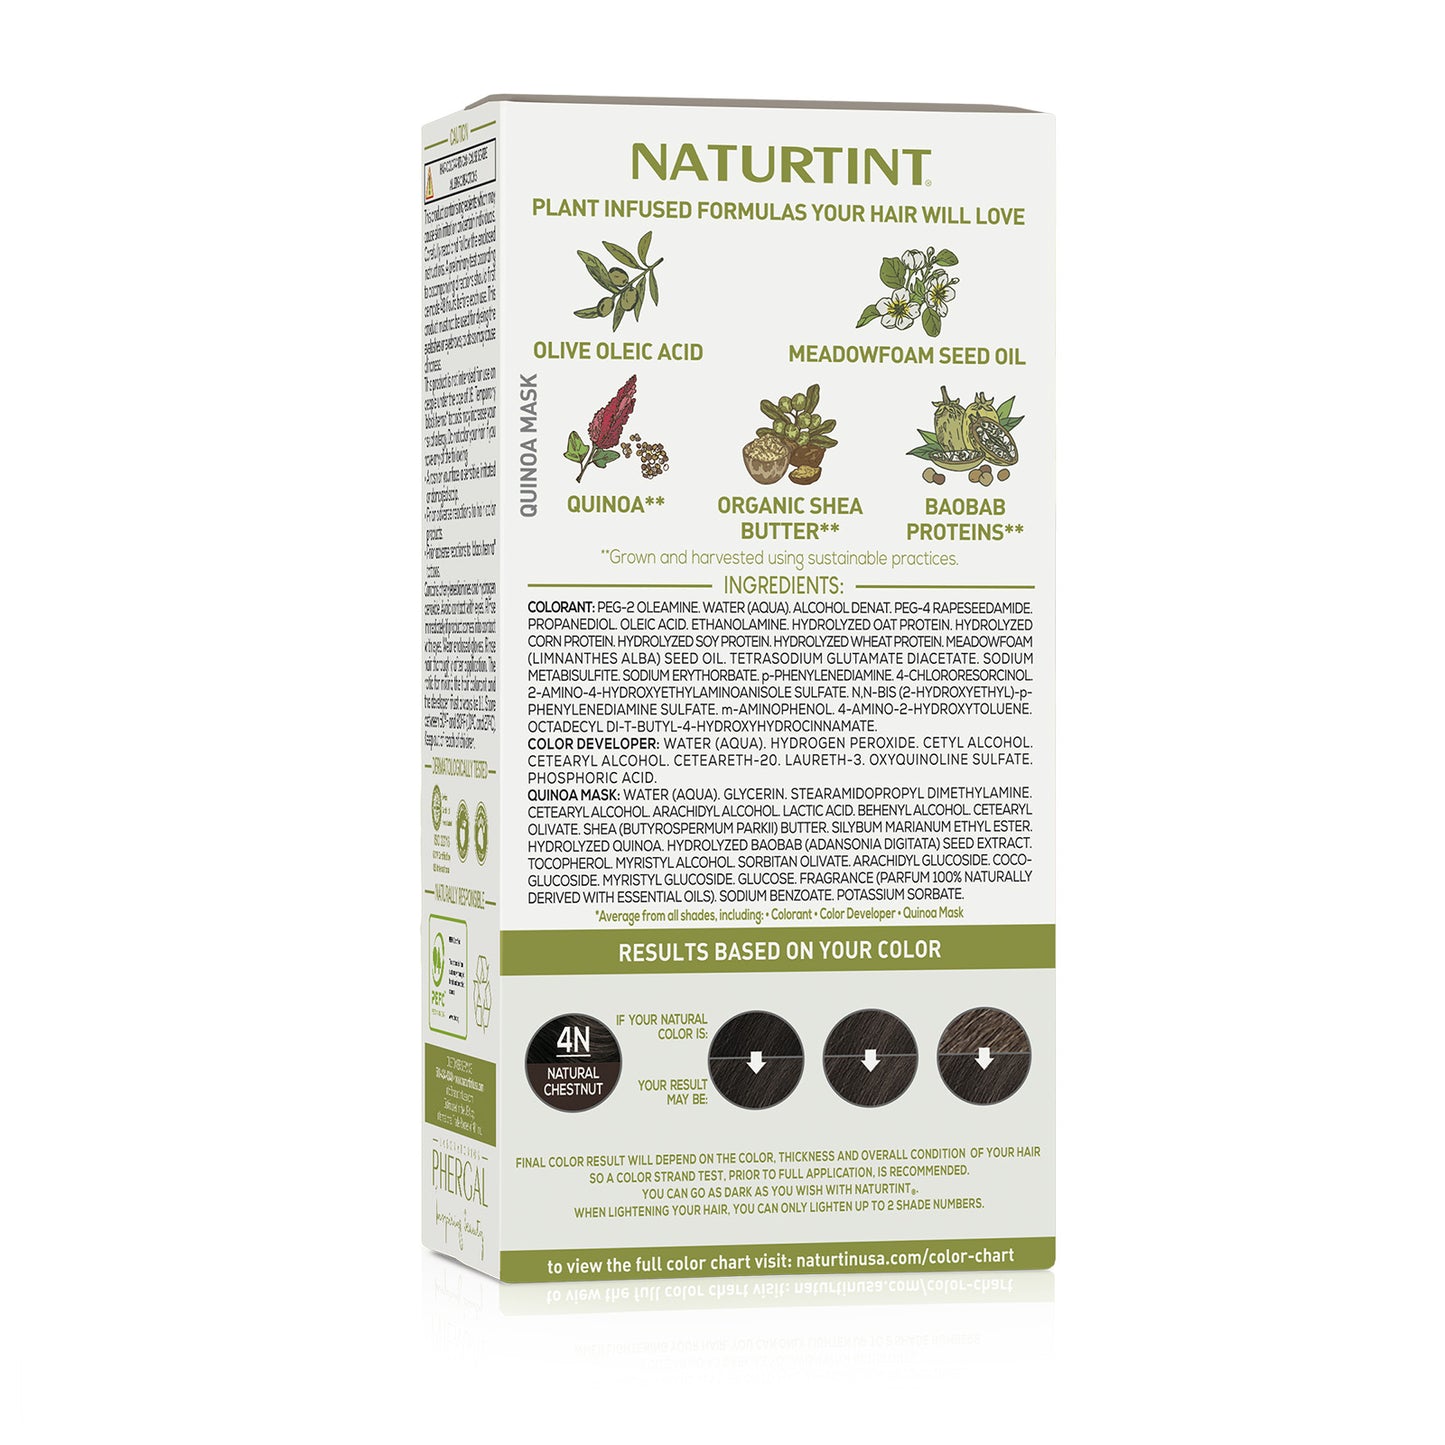 Naturtint Permanent Hair Color 4N Natural Chestnut (Packaging may vary)